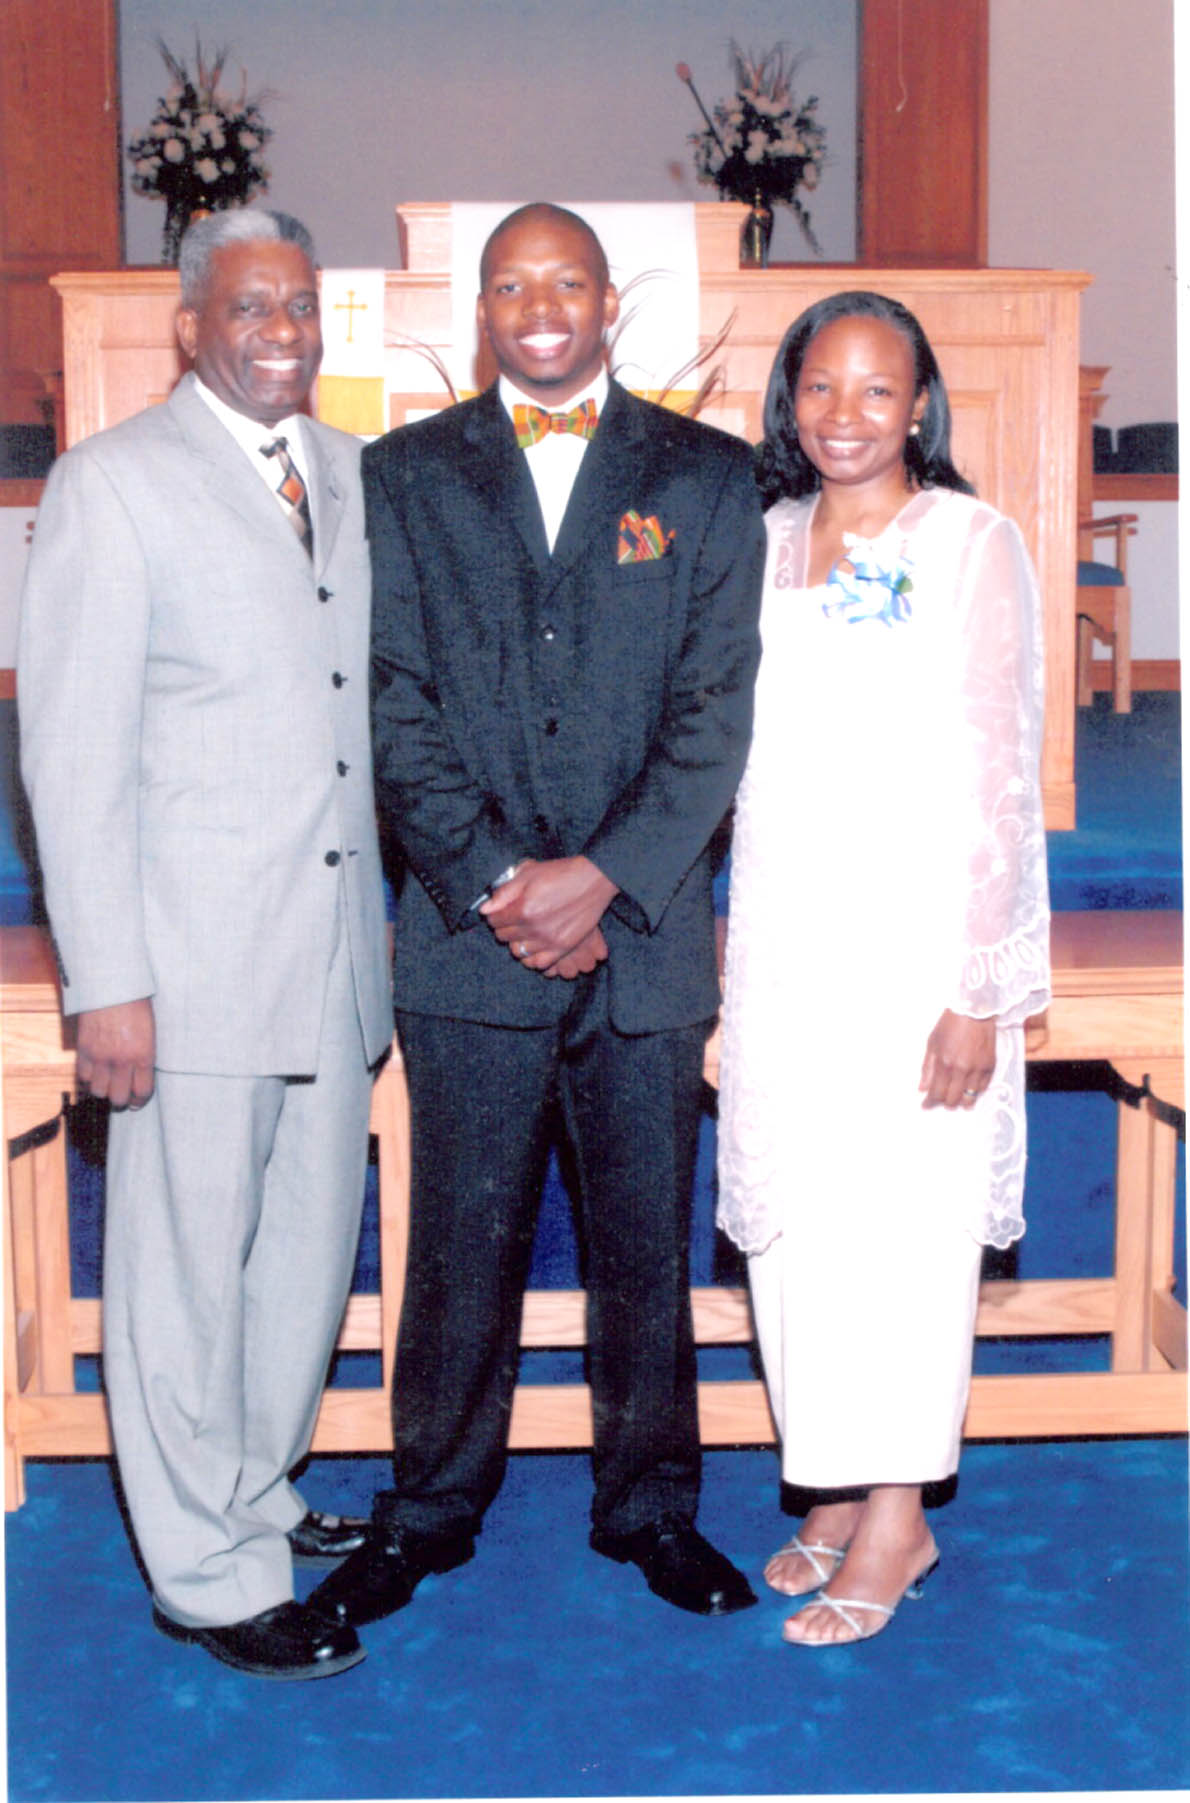 Click to enlarge,  Herman Joseph Morris Jr. (center) is pictured between his parents, the Rev. Dr. Herman J. Morris Sr. and the Rev. Denese Battle Morris. The parents are establishing a scholarship in memory of their son. 